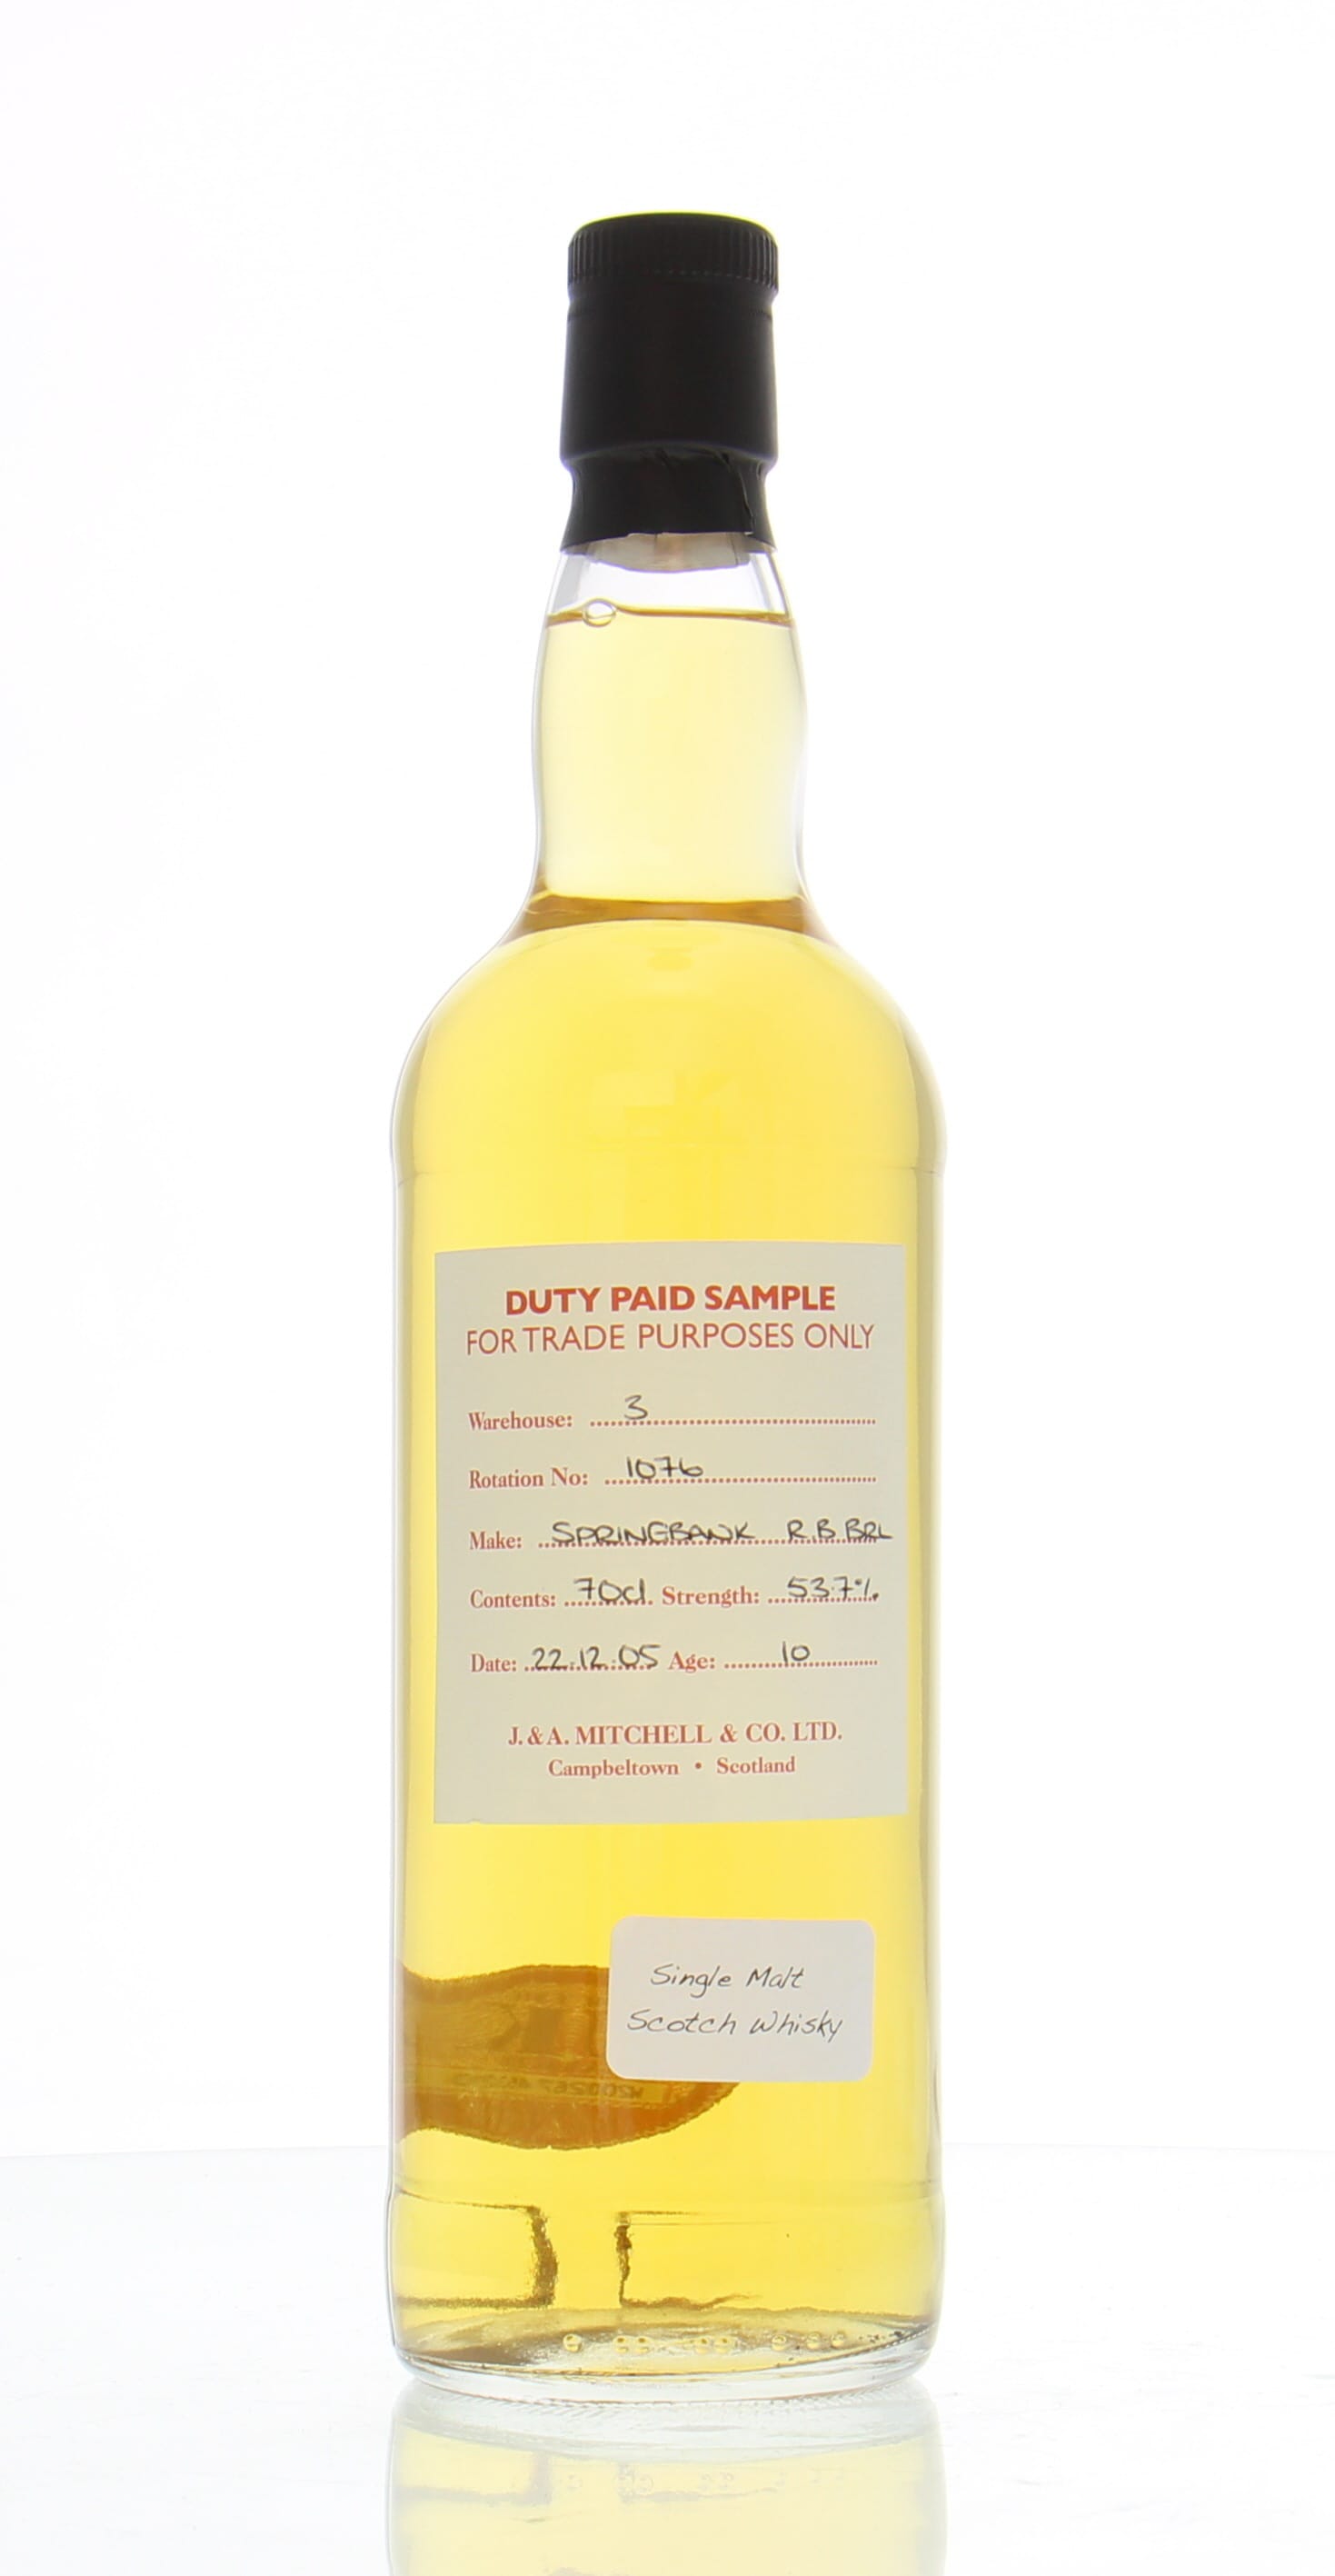 Springbank - 10 Years Old Duty Paid Sample Warehouse 3 Rotation 1076 53.7% 2005 Perfect